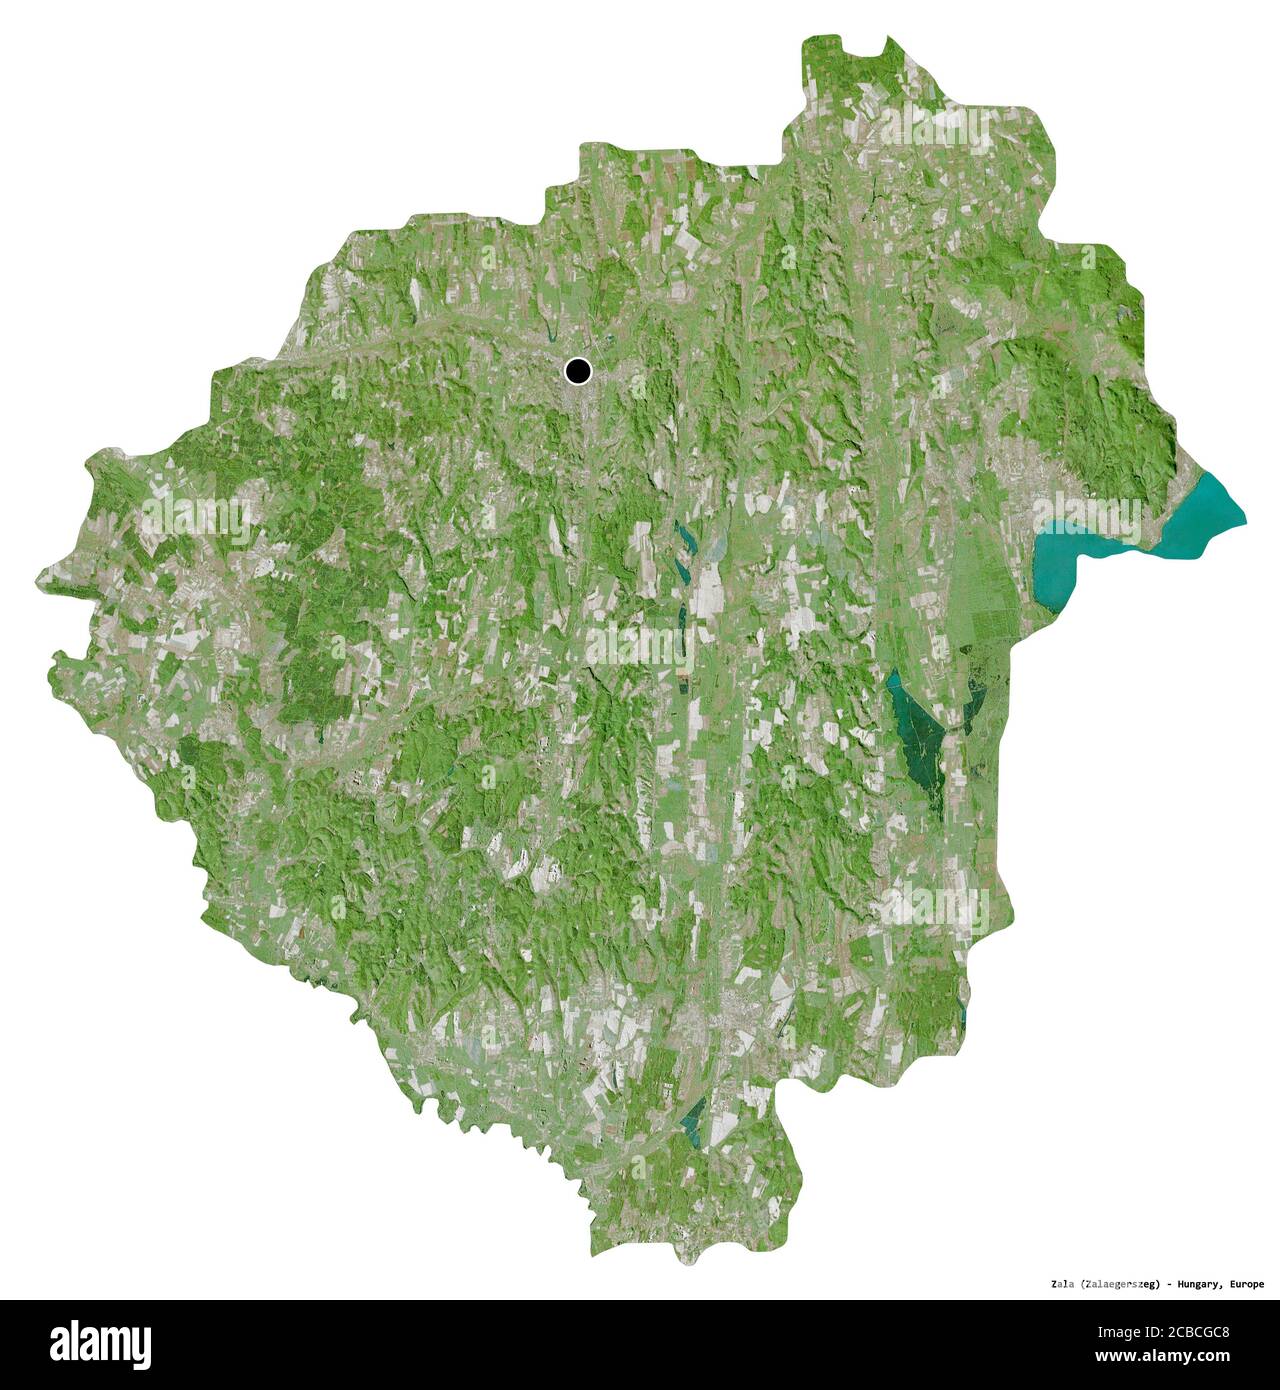 Shape of Zala, county of Hungary, with its capital isolated on white background. Satellite imagery. 3D rendering Stock Photo